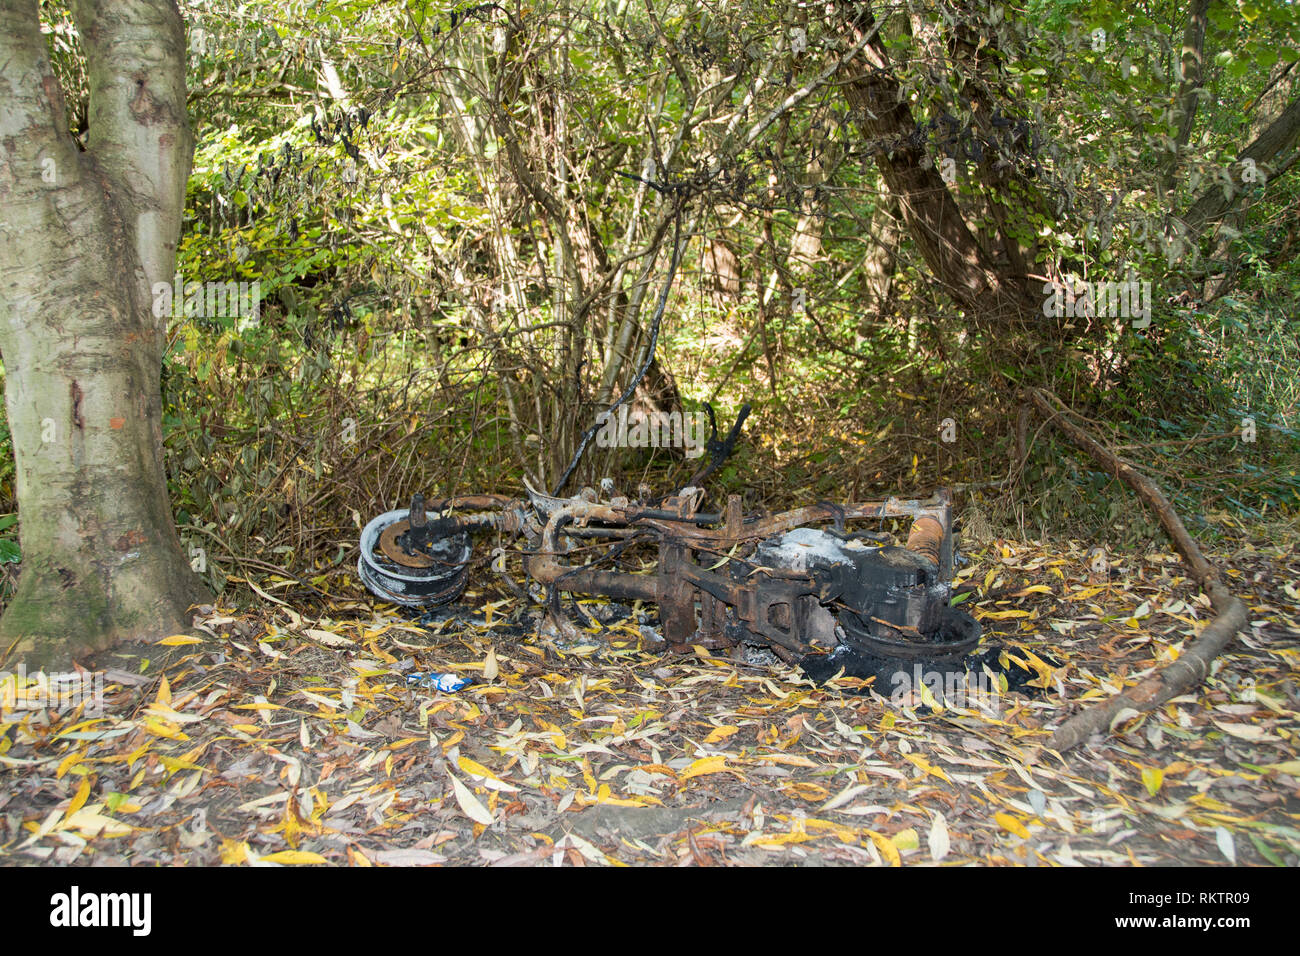 Sheffield, UK: Oct 20 2016: A burned out rusty old moped abandoned in the woods beside the forest path where it was set on fire, in Woodthorpe Ravine Stock Photo